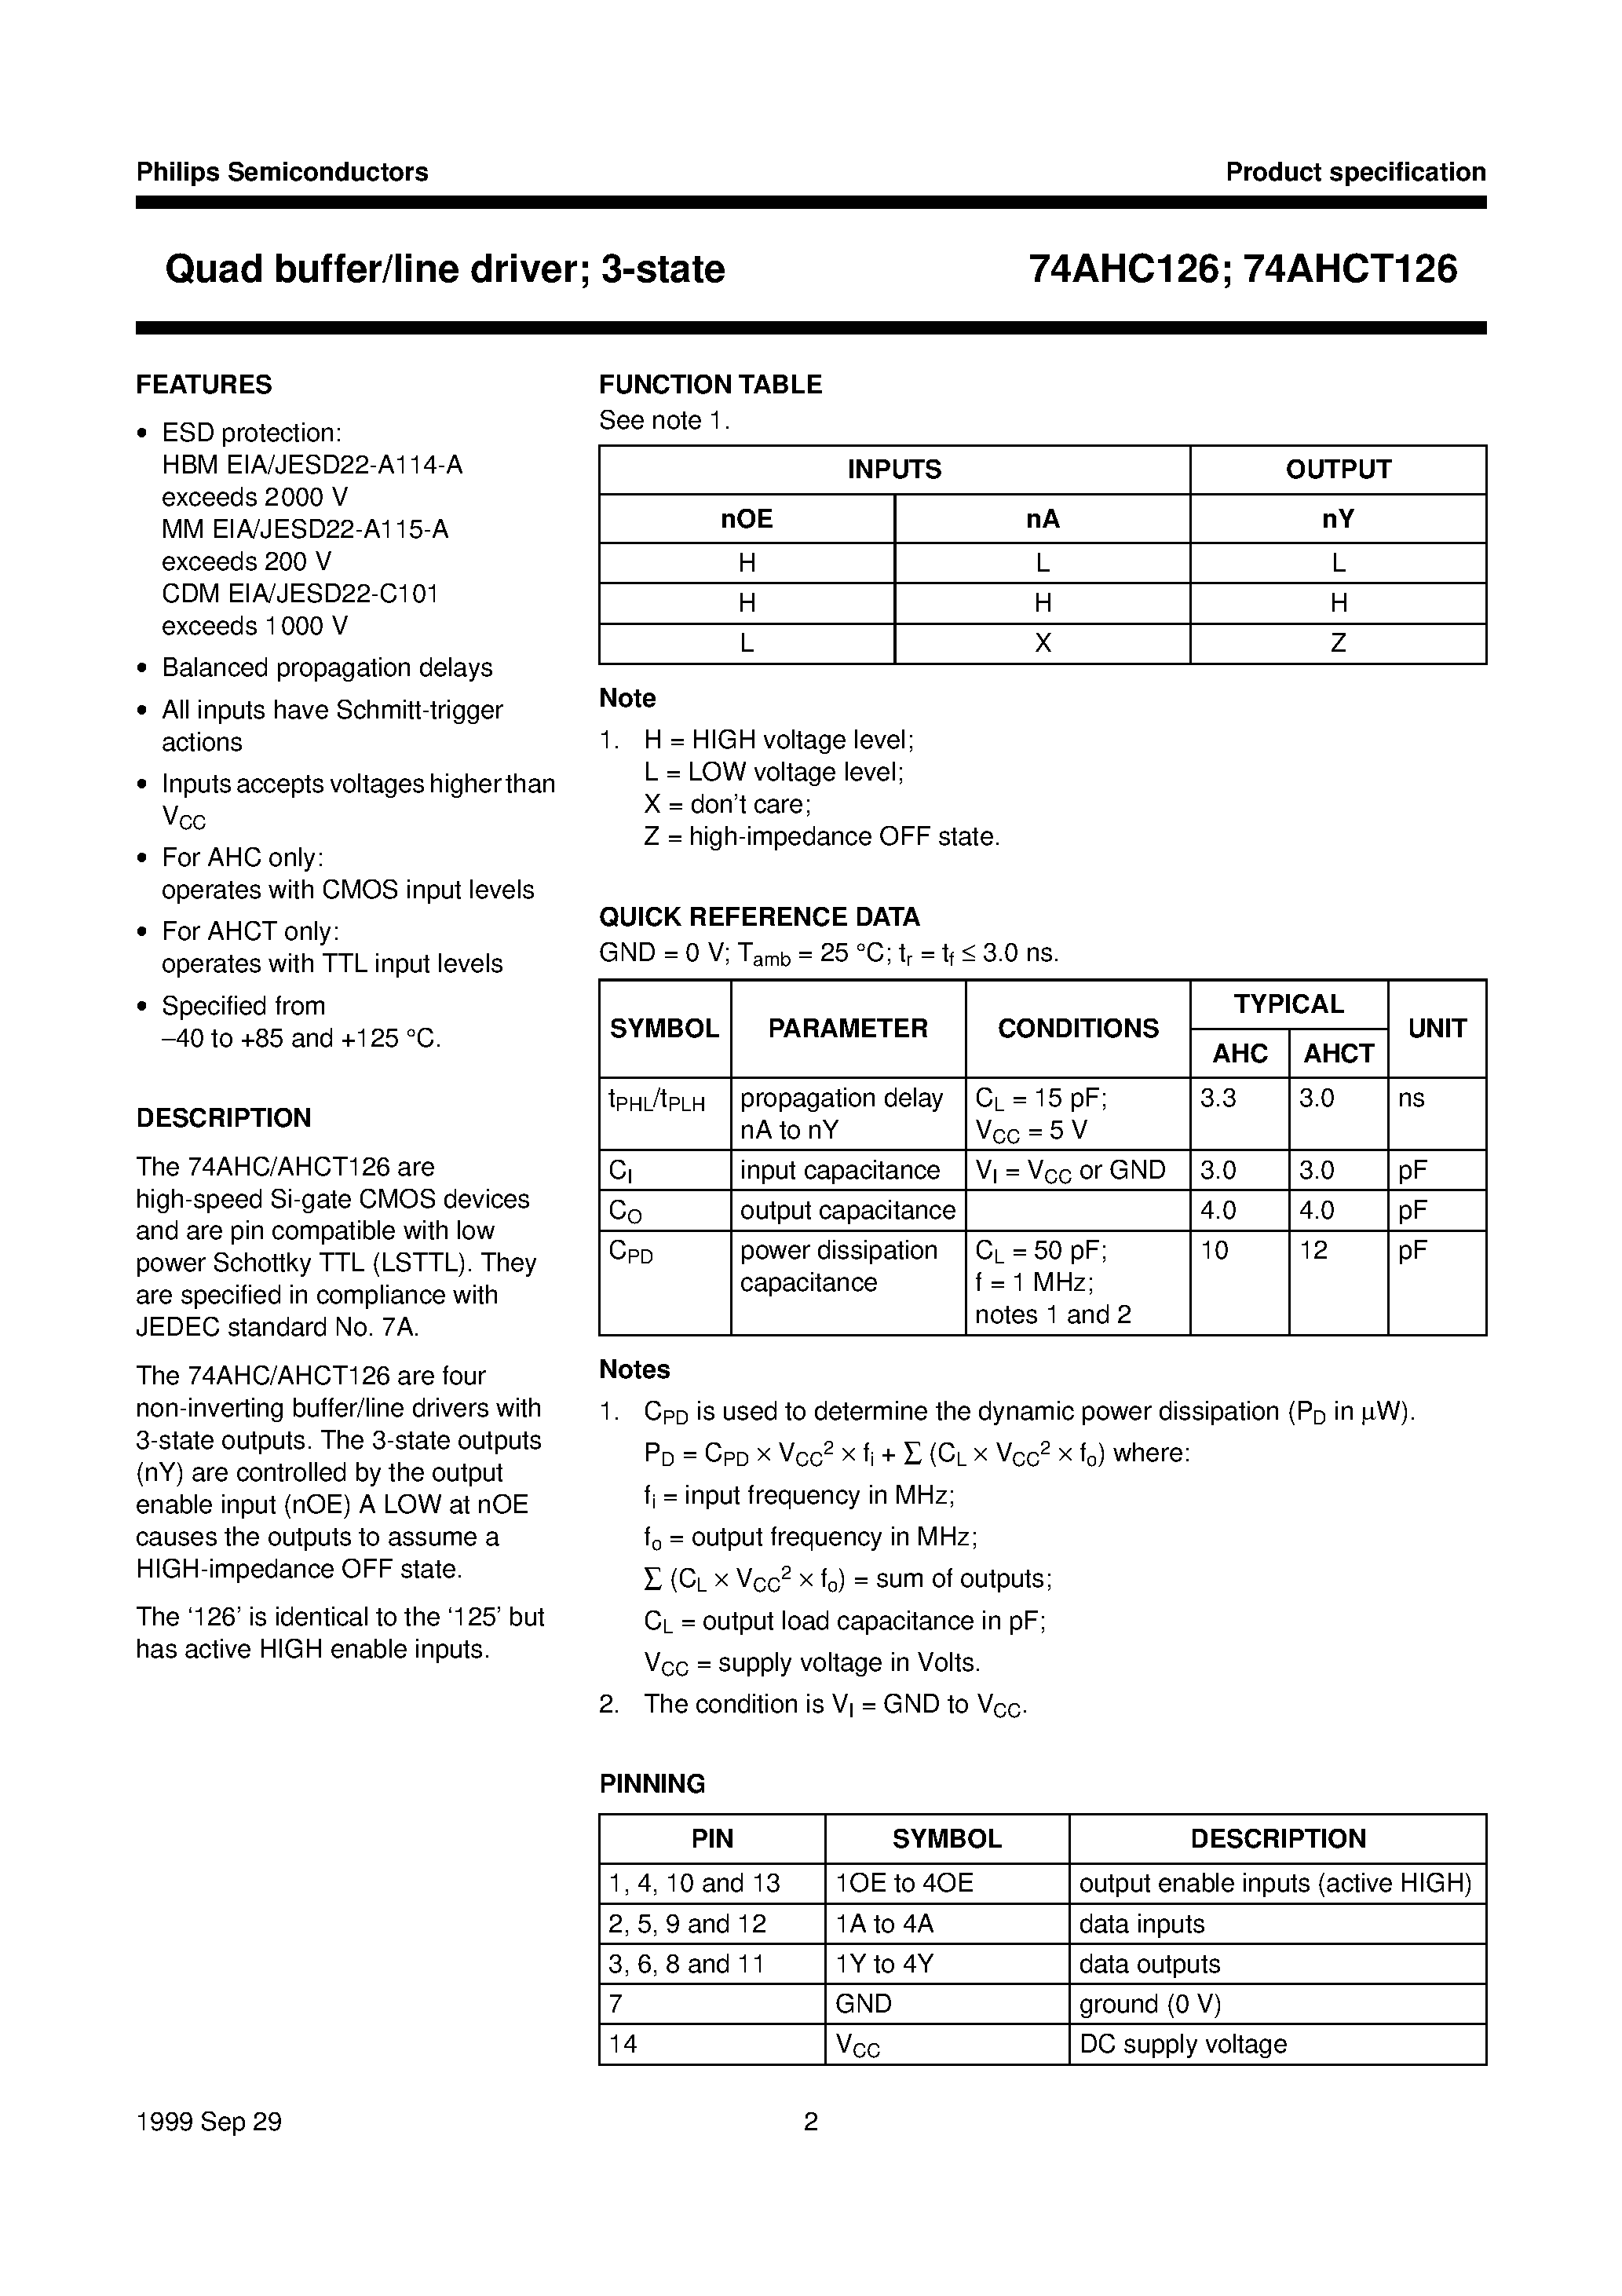 Datasheet 74AHC126 - Quad buffer/line driver; 3-state page 2